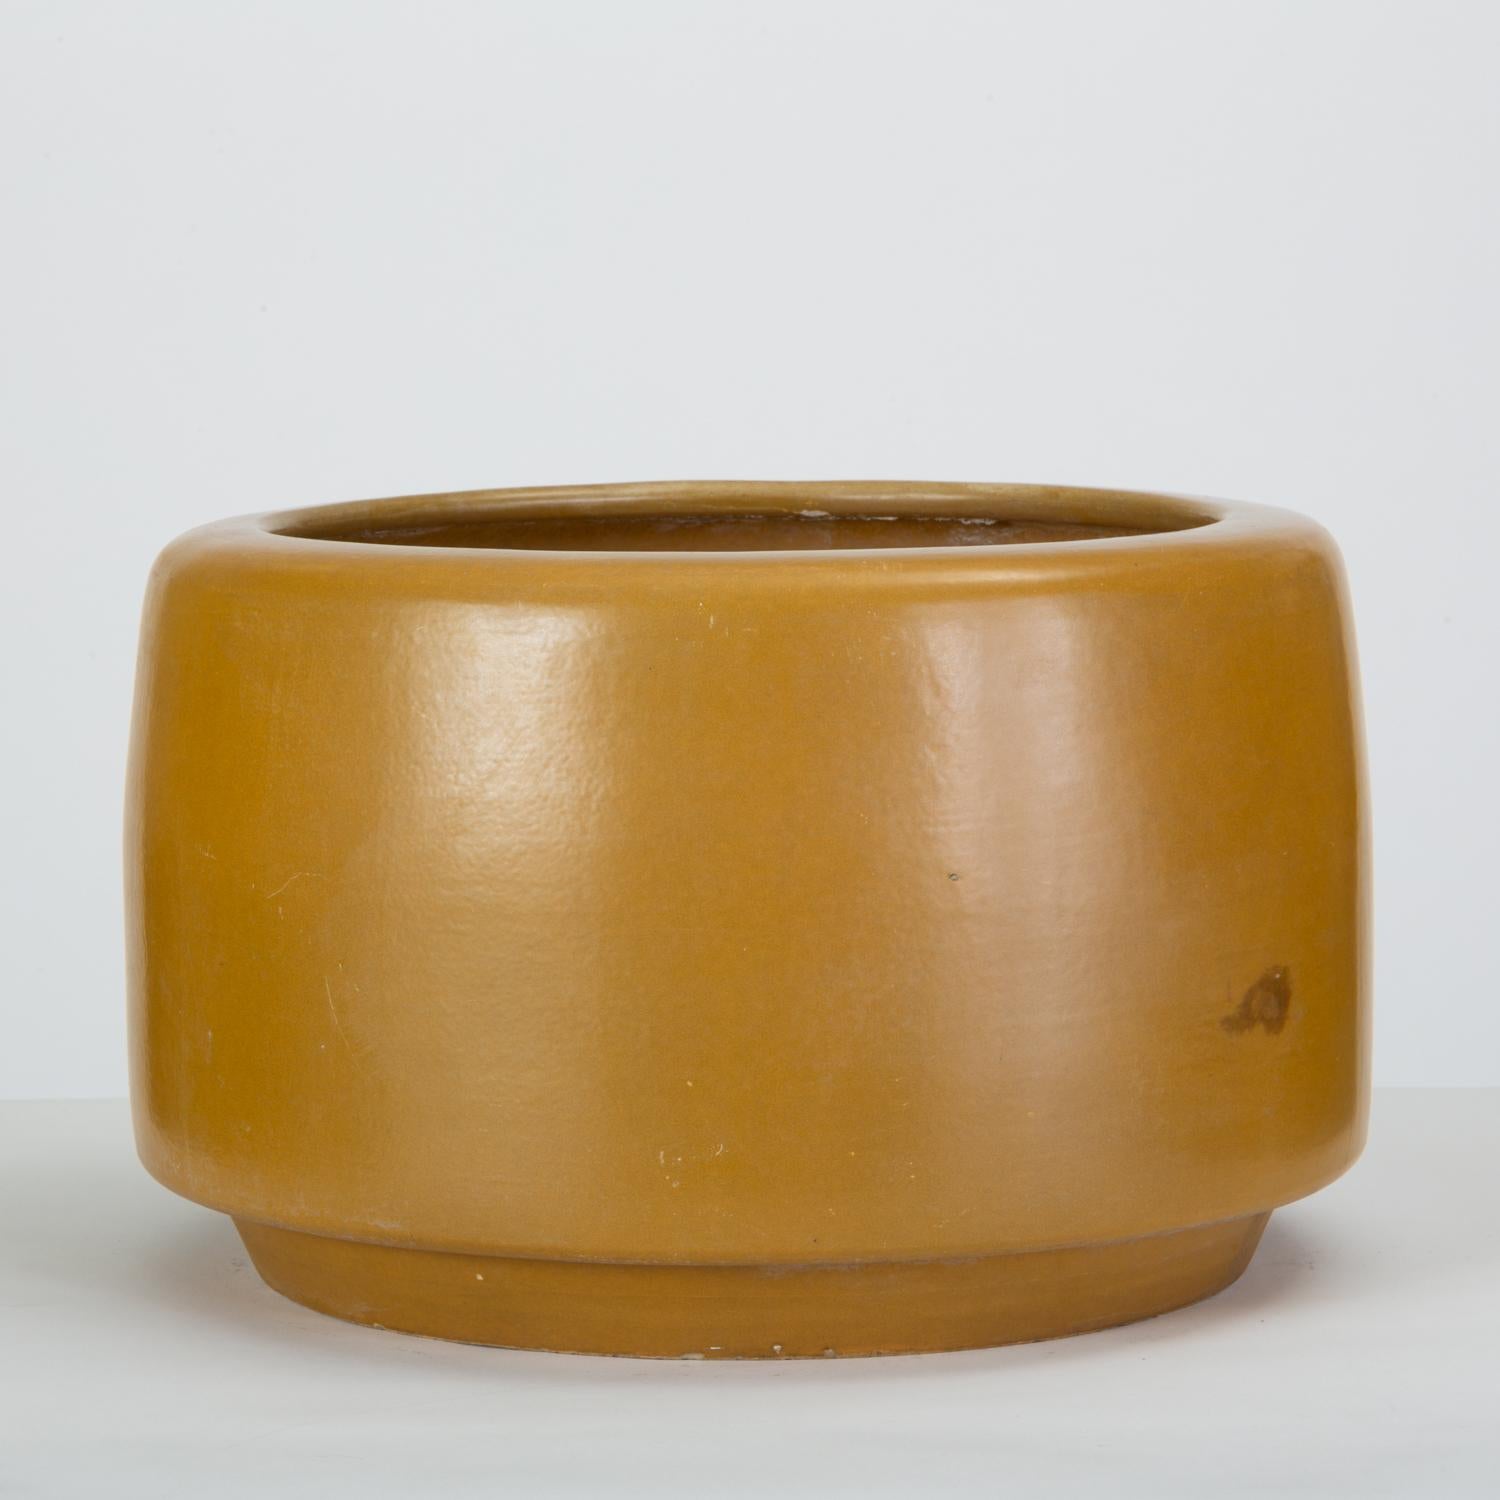 Glazed CP-17 Tire Planter by John Follis for Architectural Pottery in Yellow Glaze